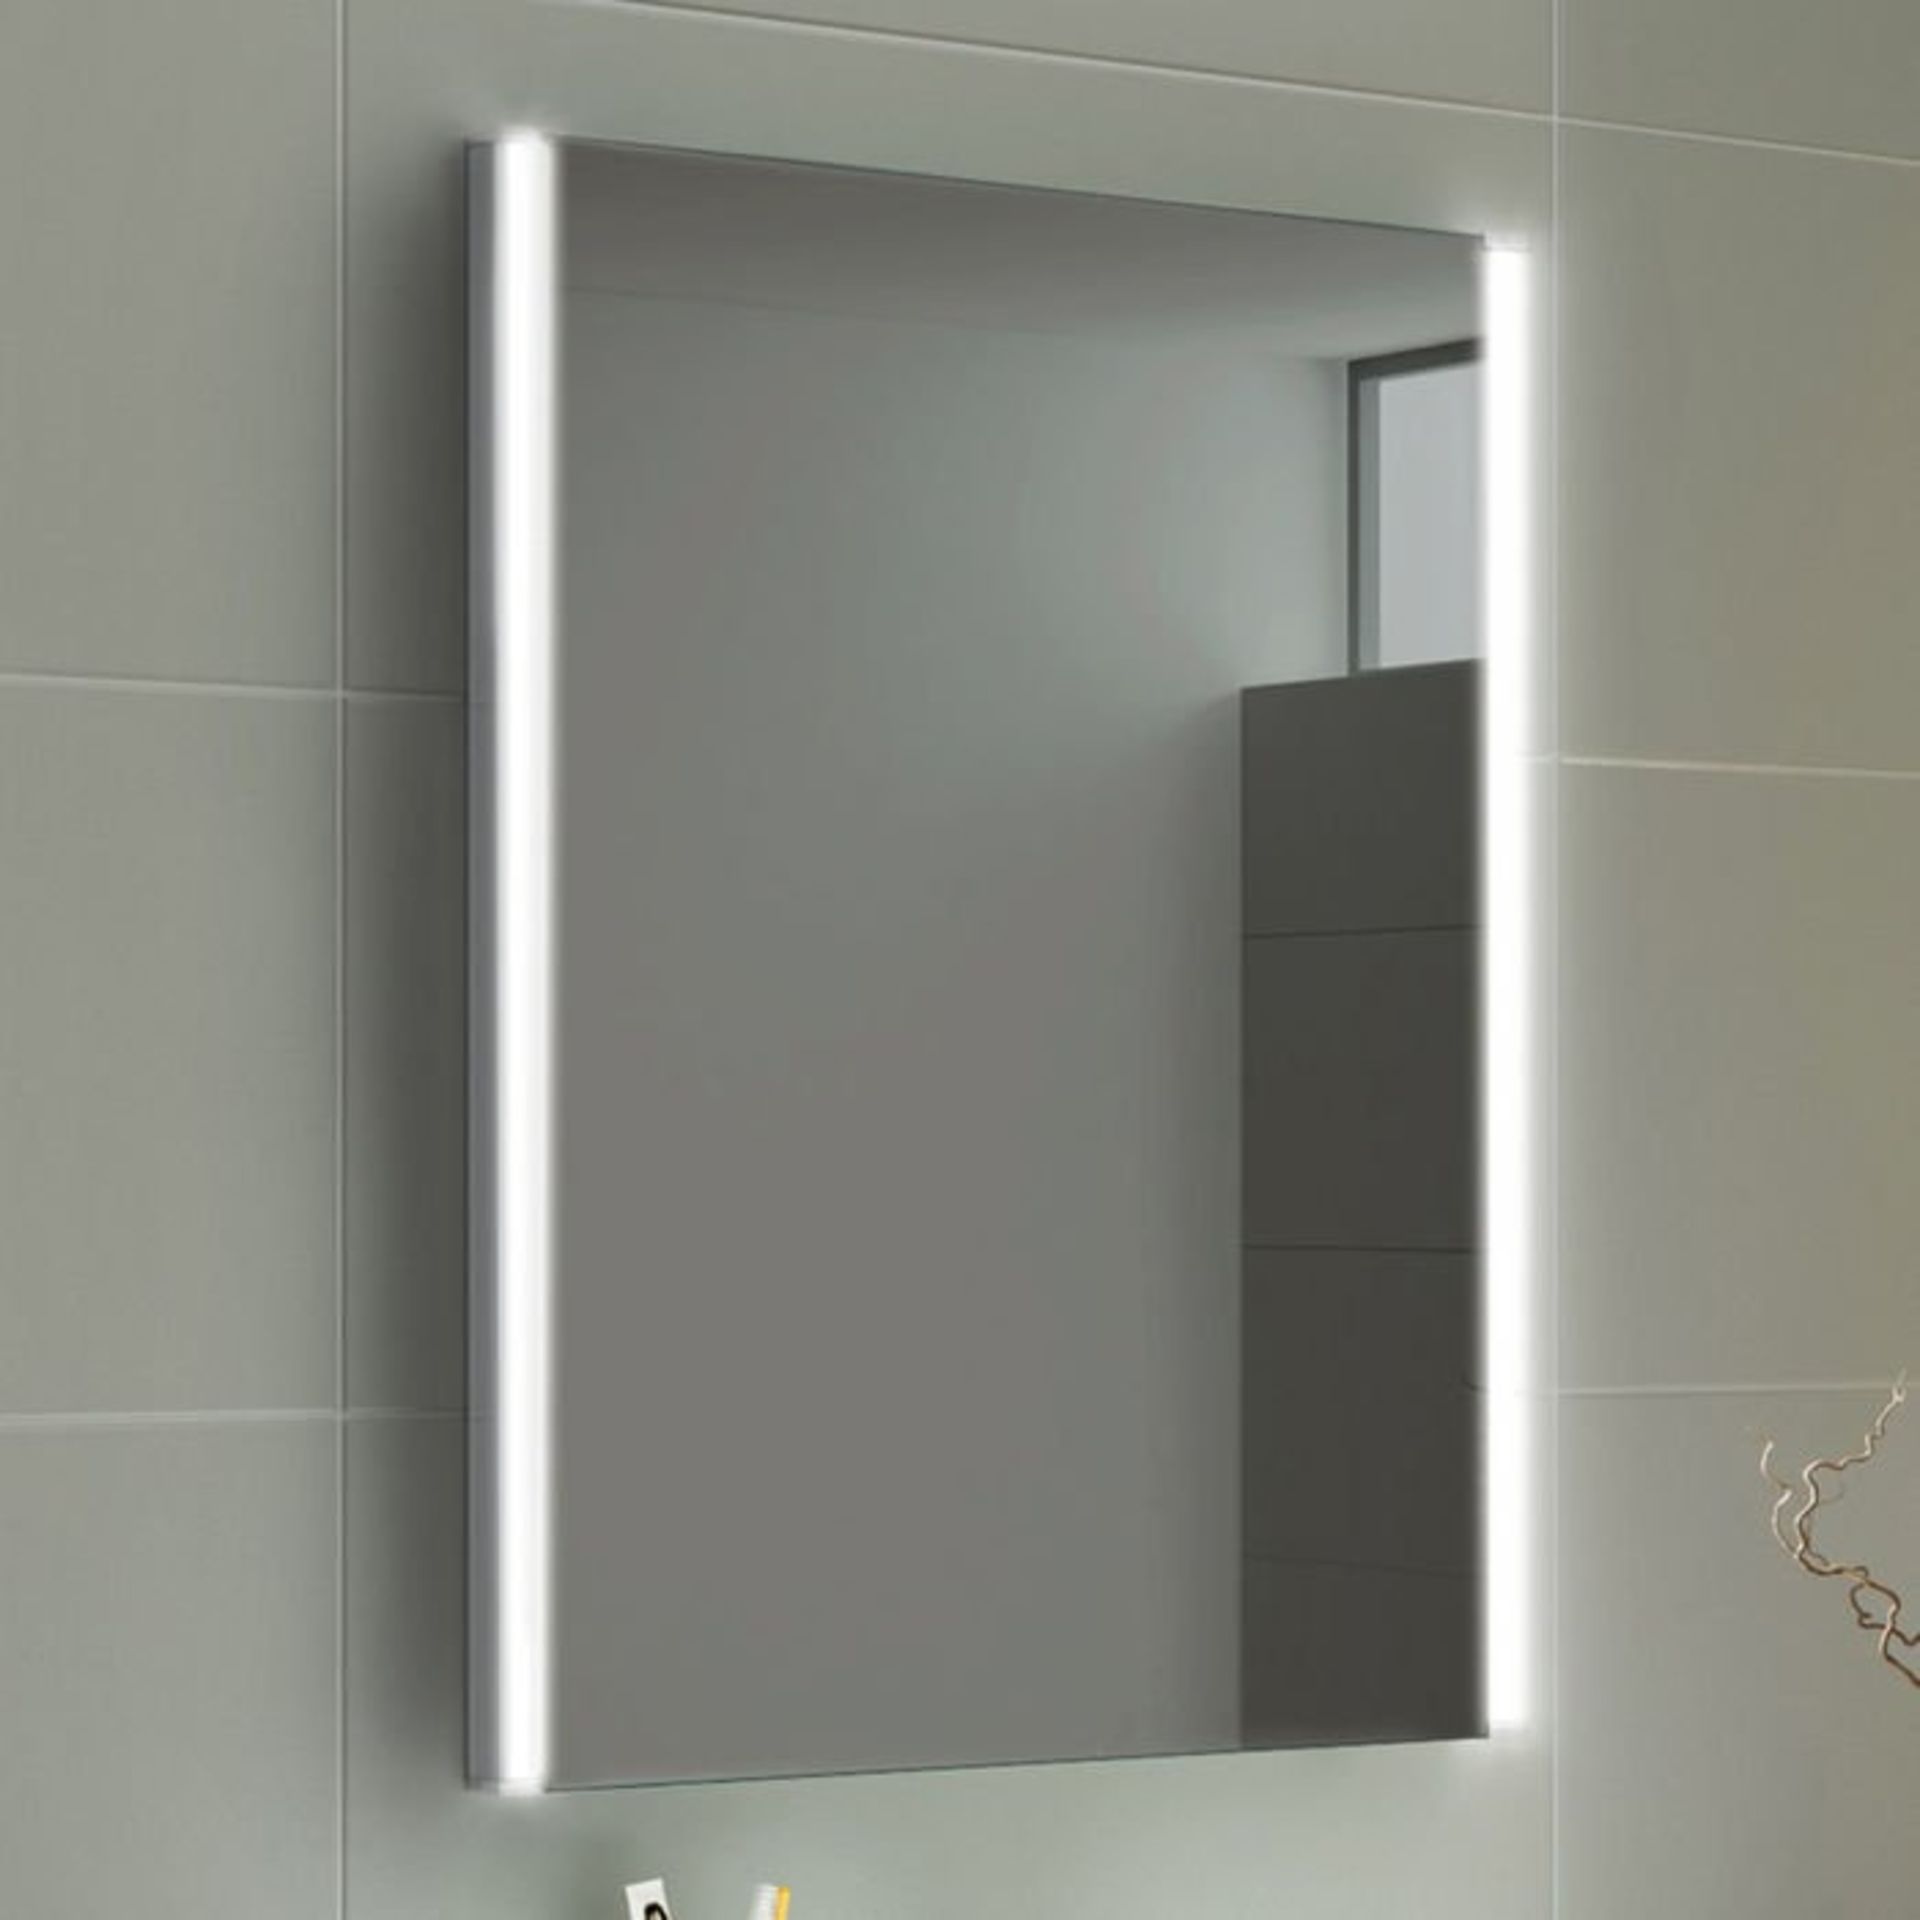 (L207) 500x700mm Lunar LED Mirror - Battery Operated. Energy saving controlled On / Off switch